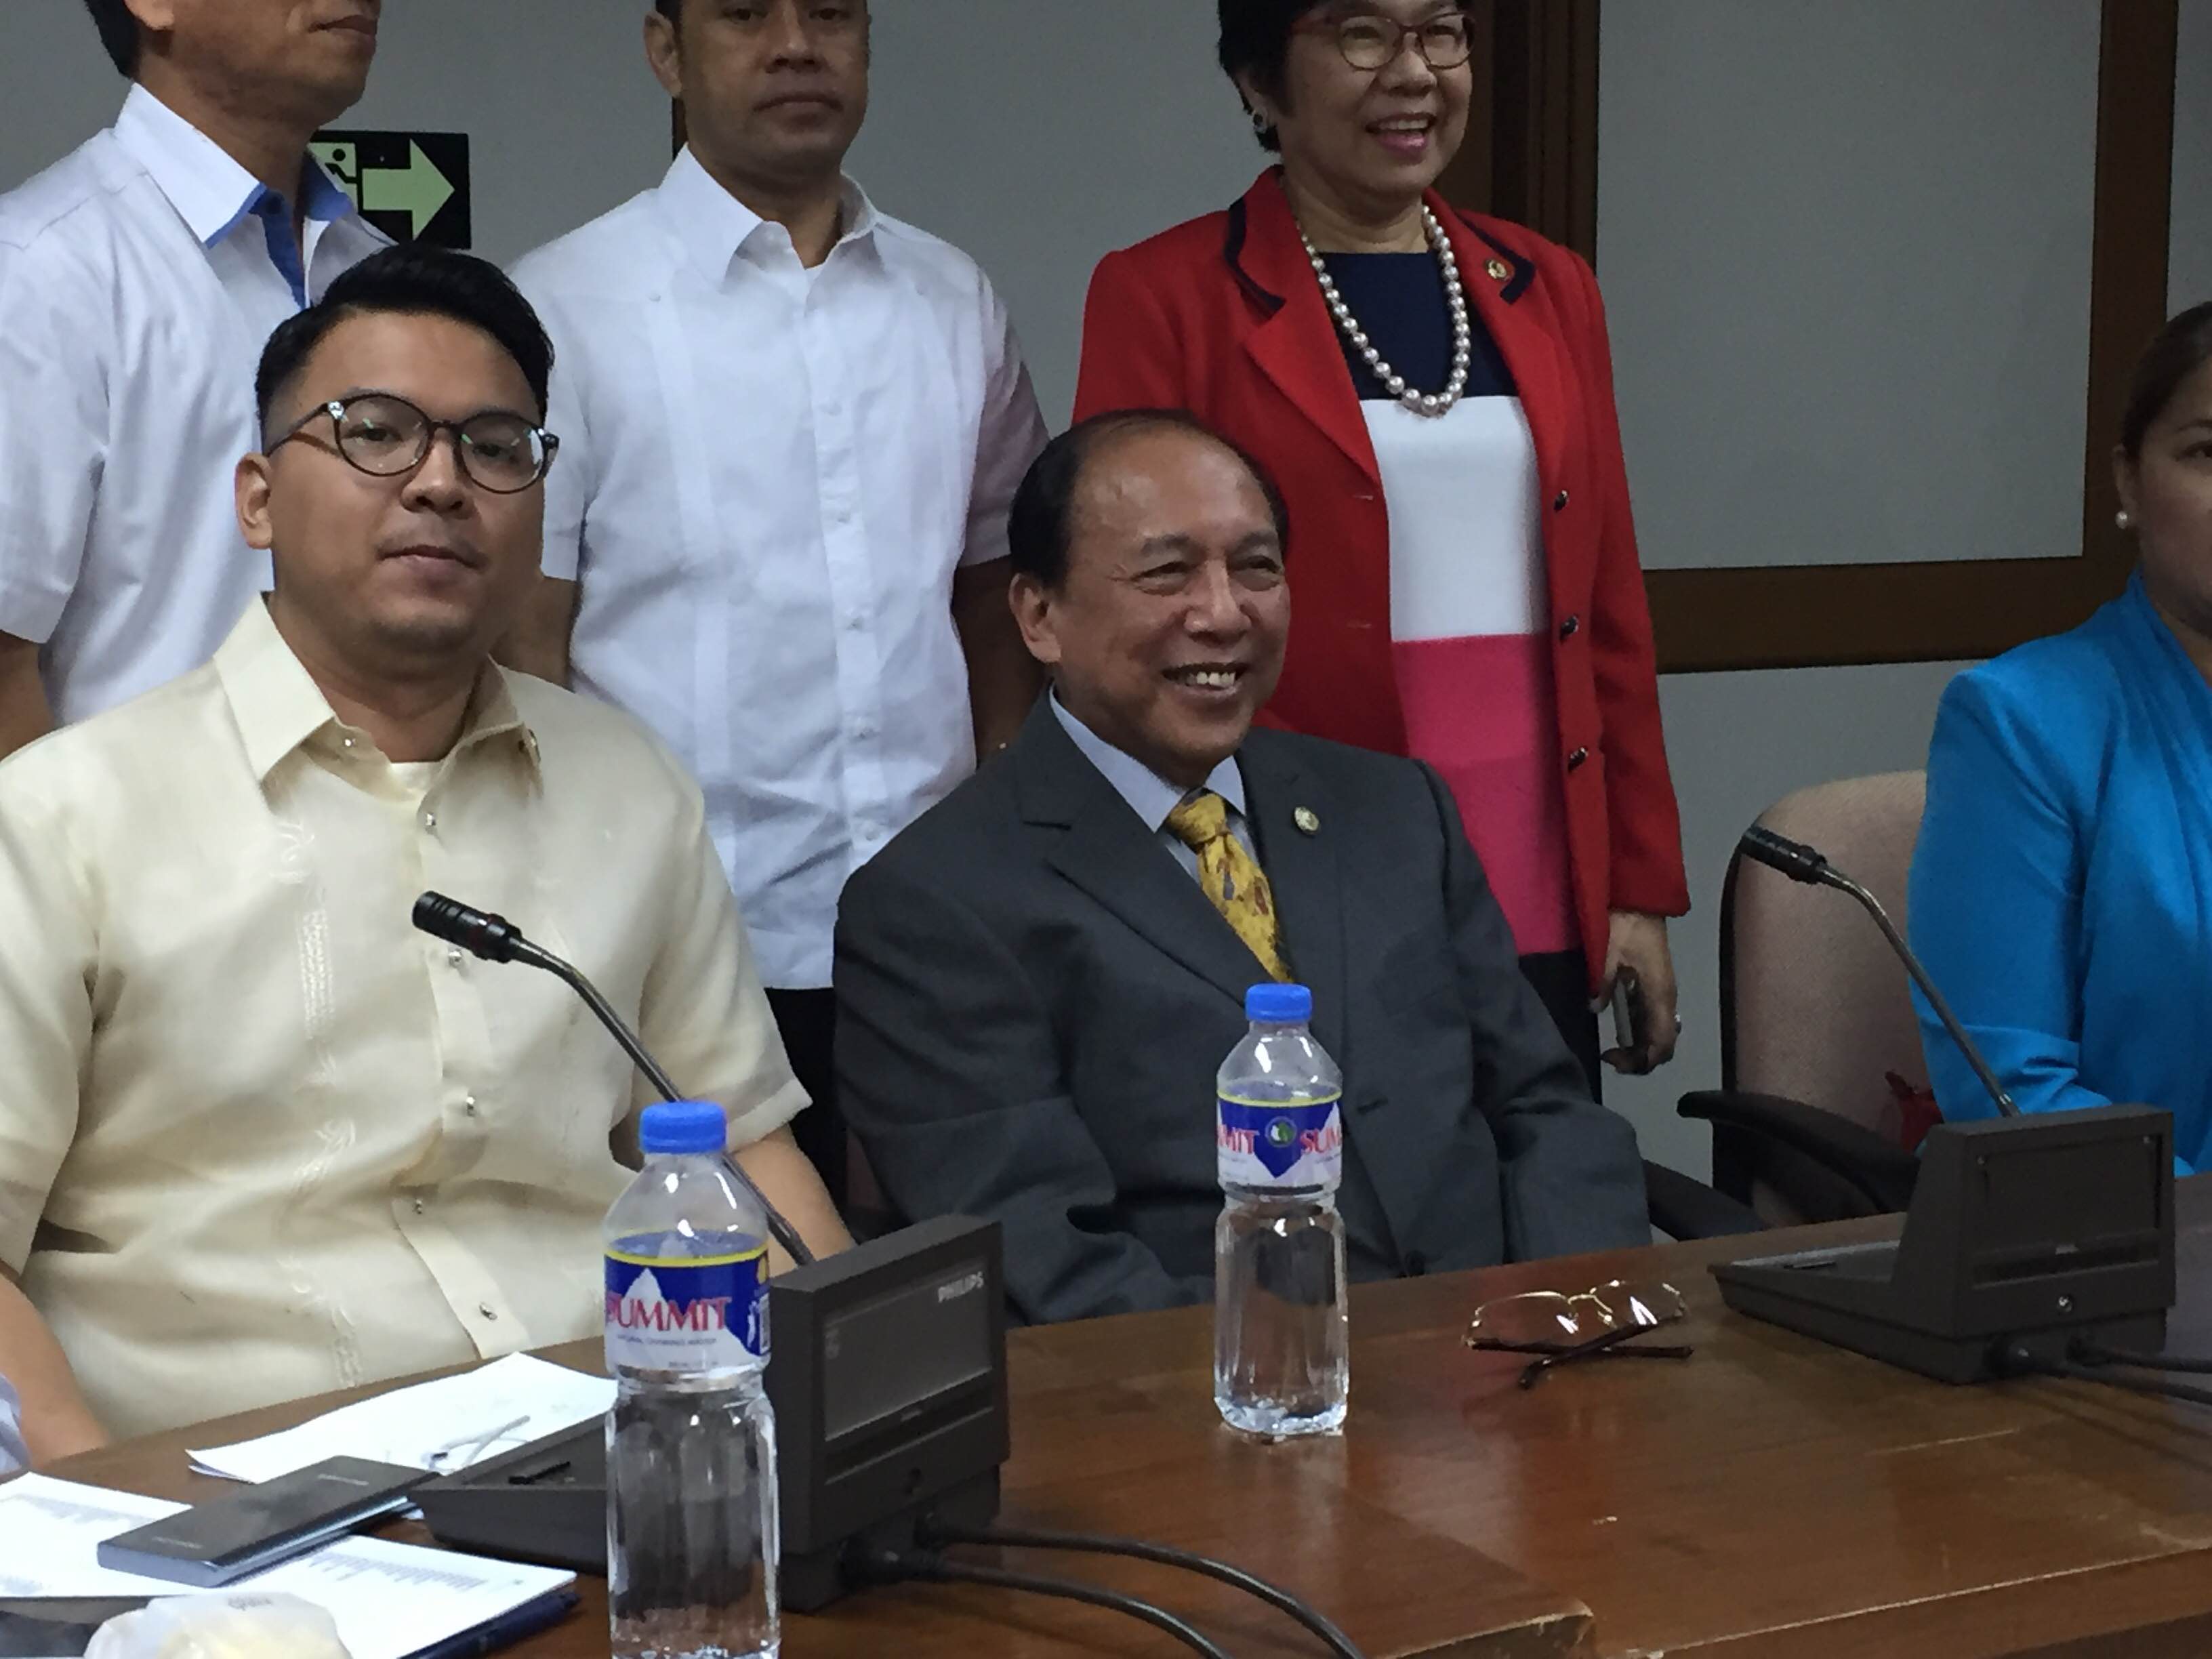 NEW MINORITY LEADER. Quezon 3rd District Representative Danilo Suarez (center) is the new leader of the House minority bloc following elections on July 27, 2016. Photo by Mara Cepeda/Rappler  